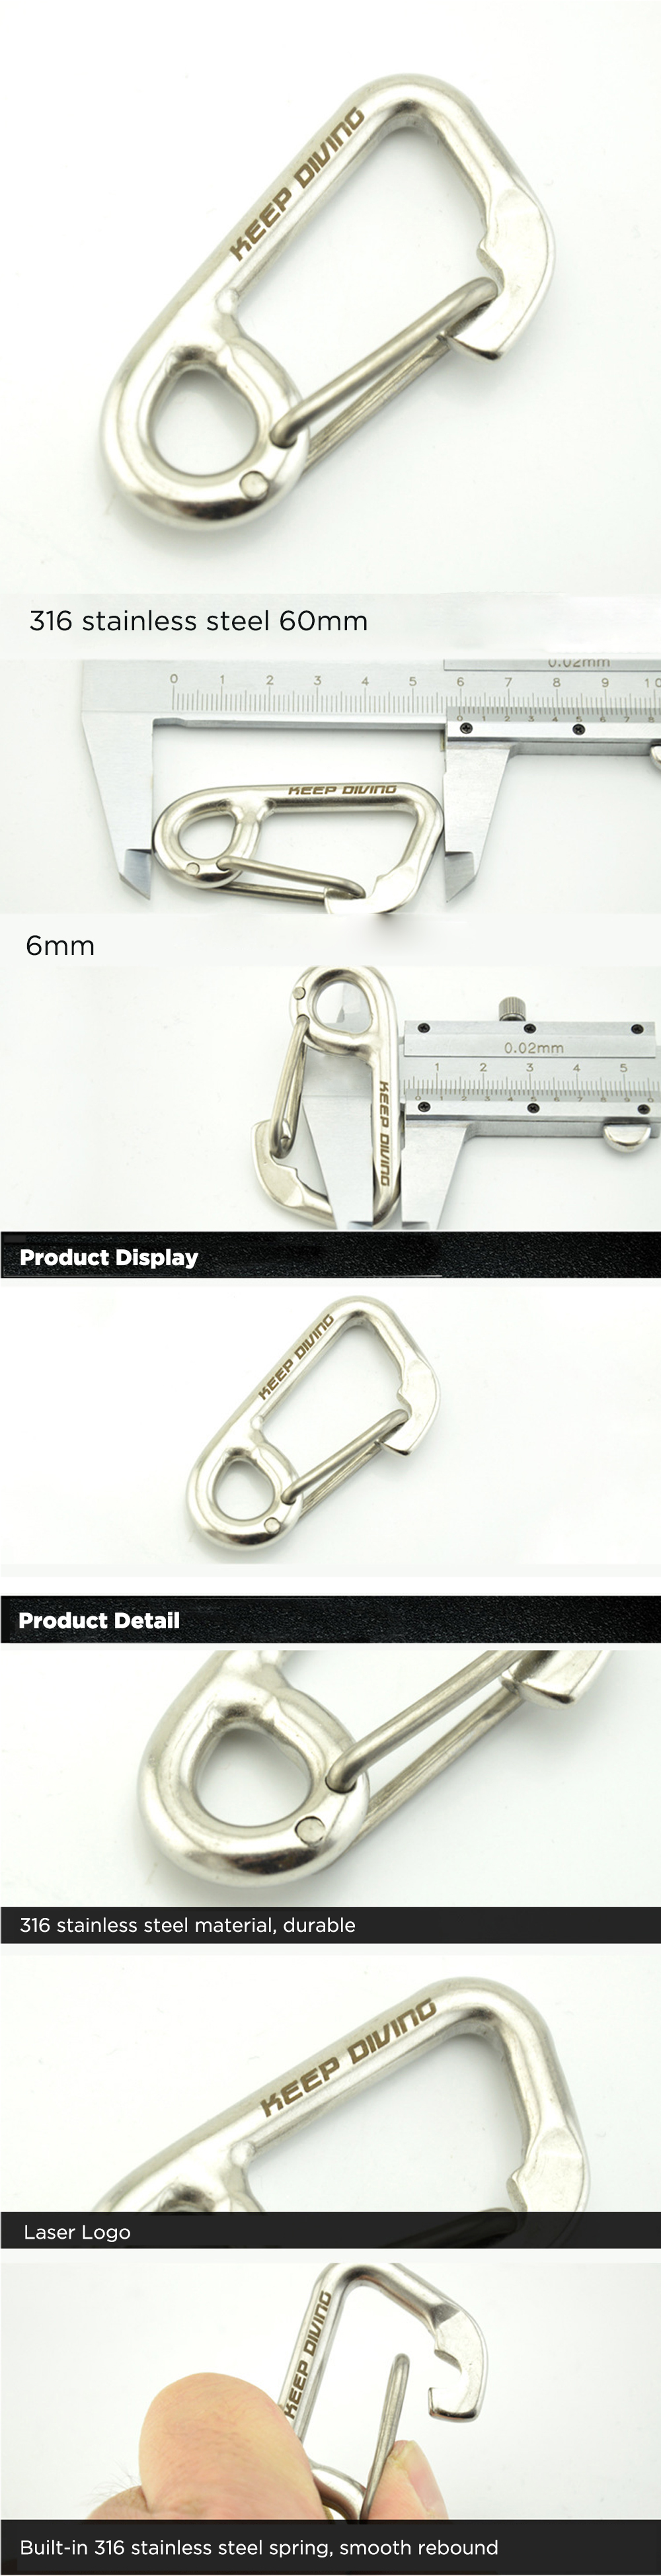 KEEP-DIVING-Climbing-Safety-Carabiner-316-Stainless-Steel-Snap-Hook-Hang-Buckle-EDC-Tools-for-Outdoo-1801369-1